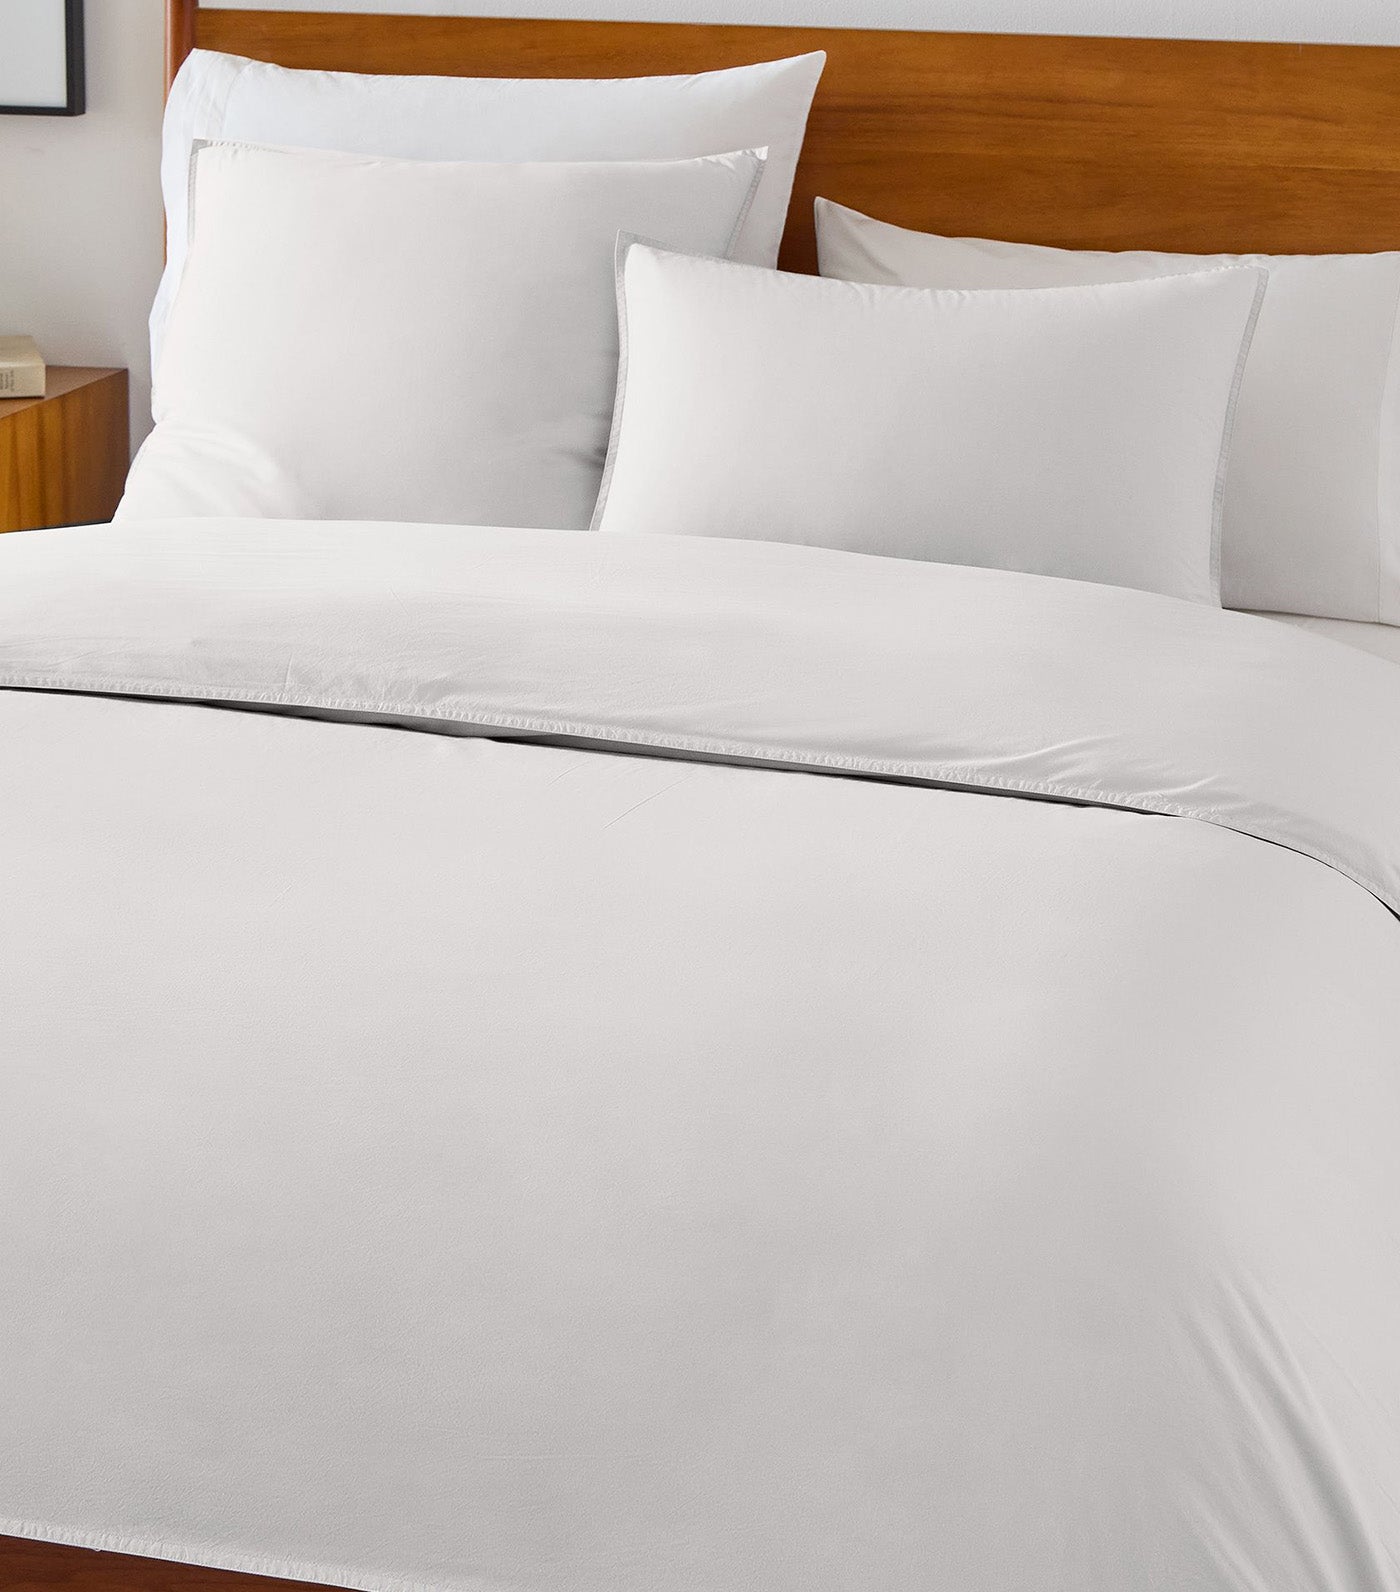 Organic Washed Cotton Percale Duvet Cover and Shams